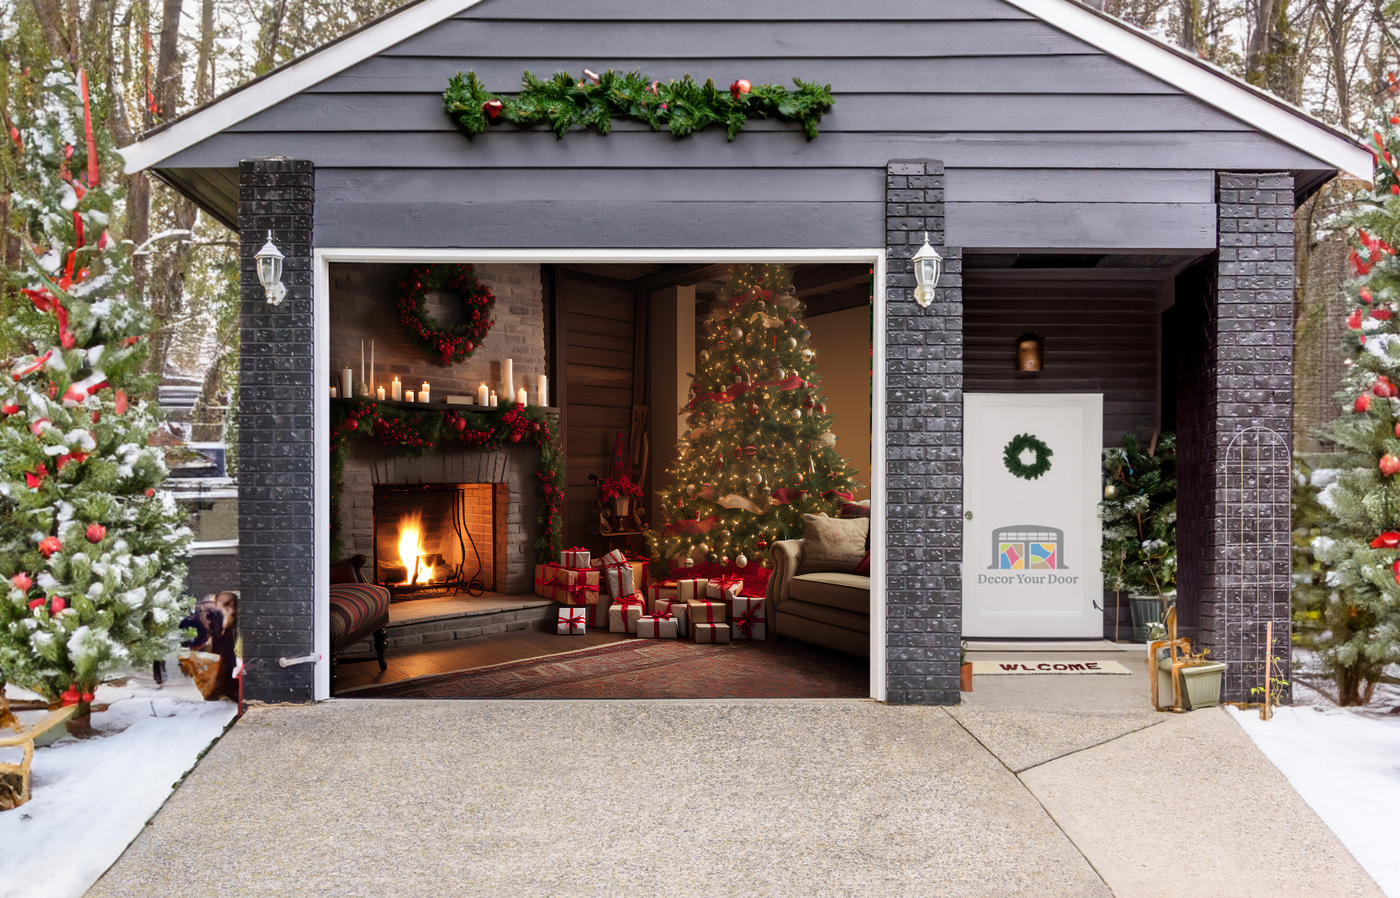 Fireplace Decorated with Christmas Decorations and Christmas Tree in Living Room Garage Door Cover Wrap Backdrop Decoration